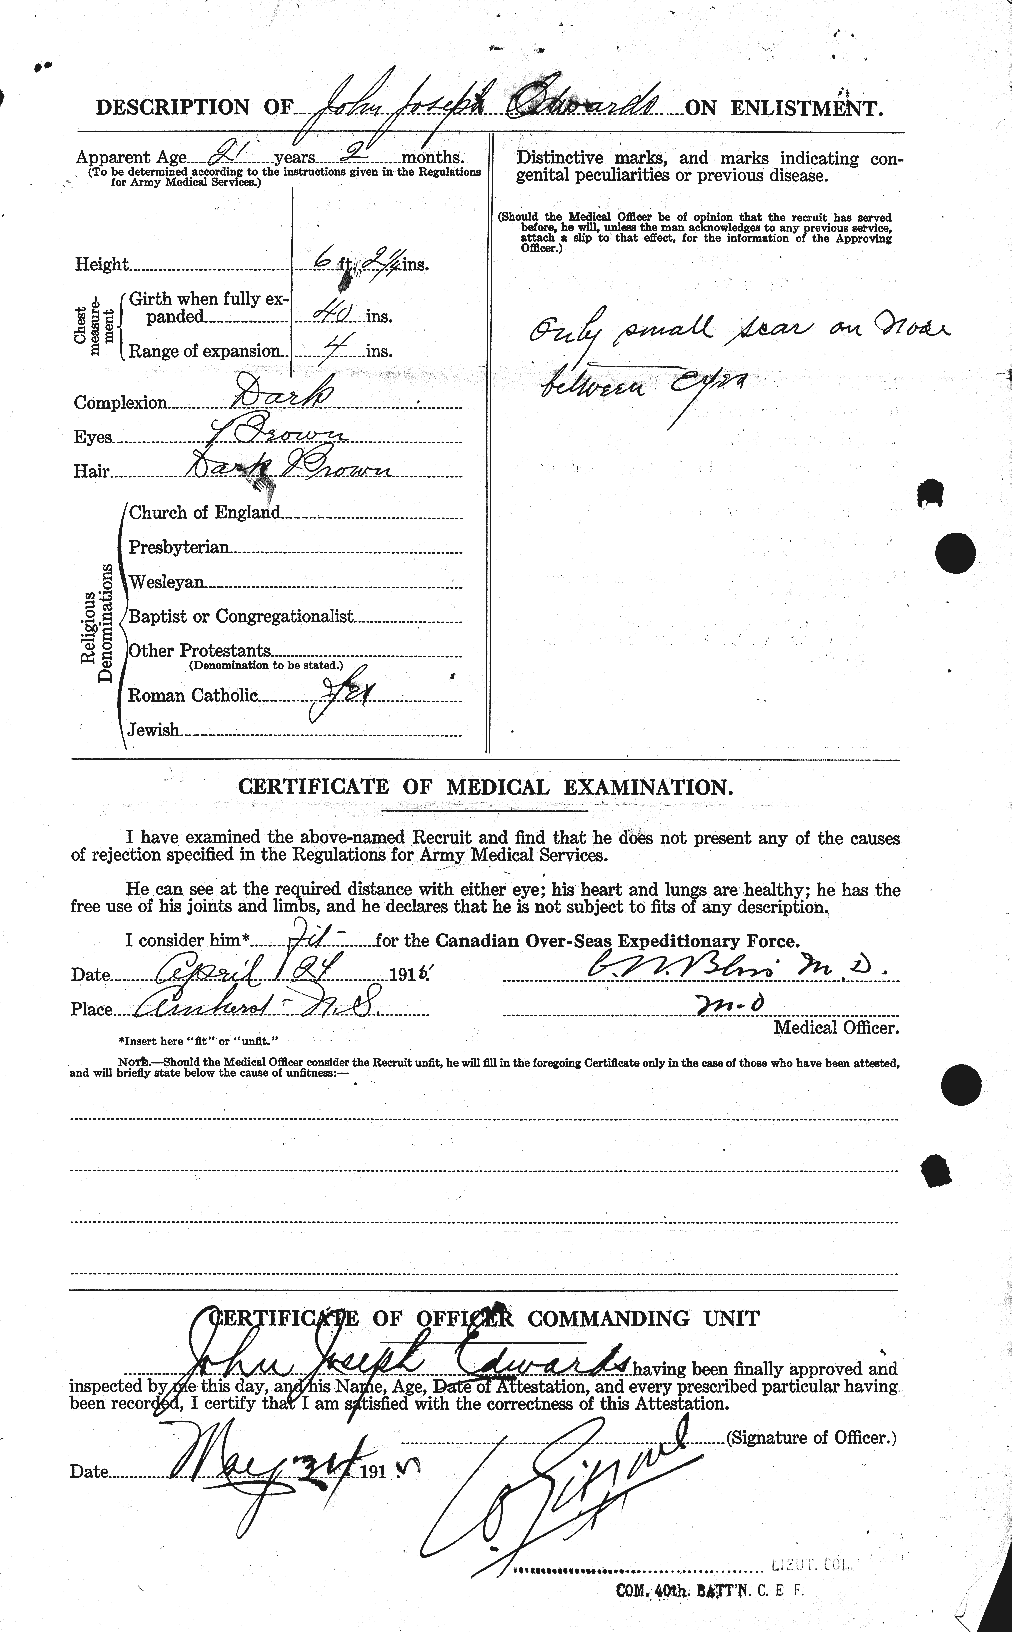 Personnel Records of the First World War - CEF 310142b